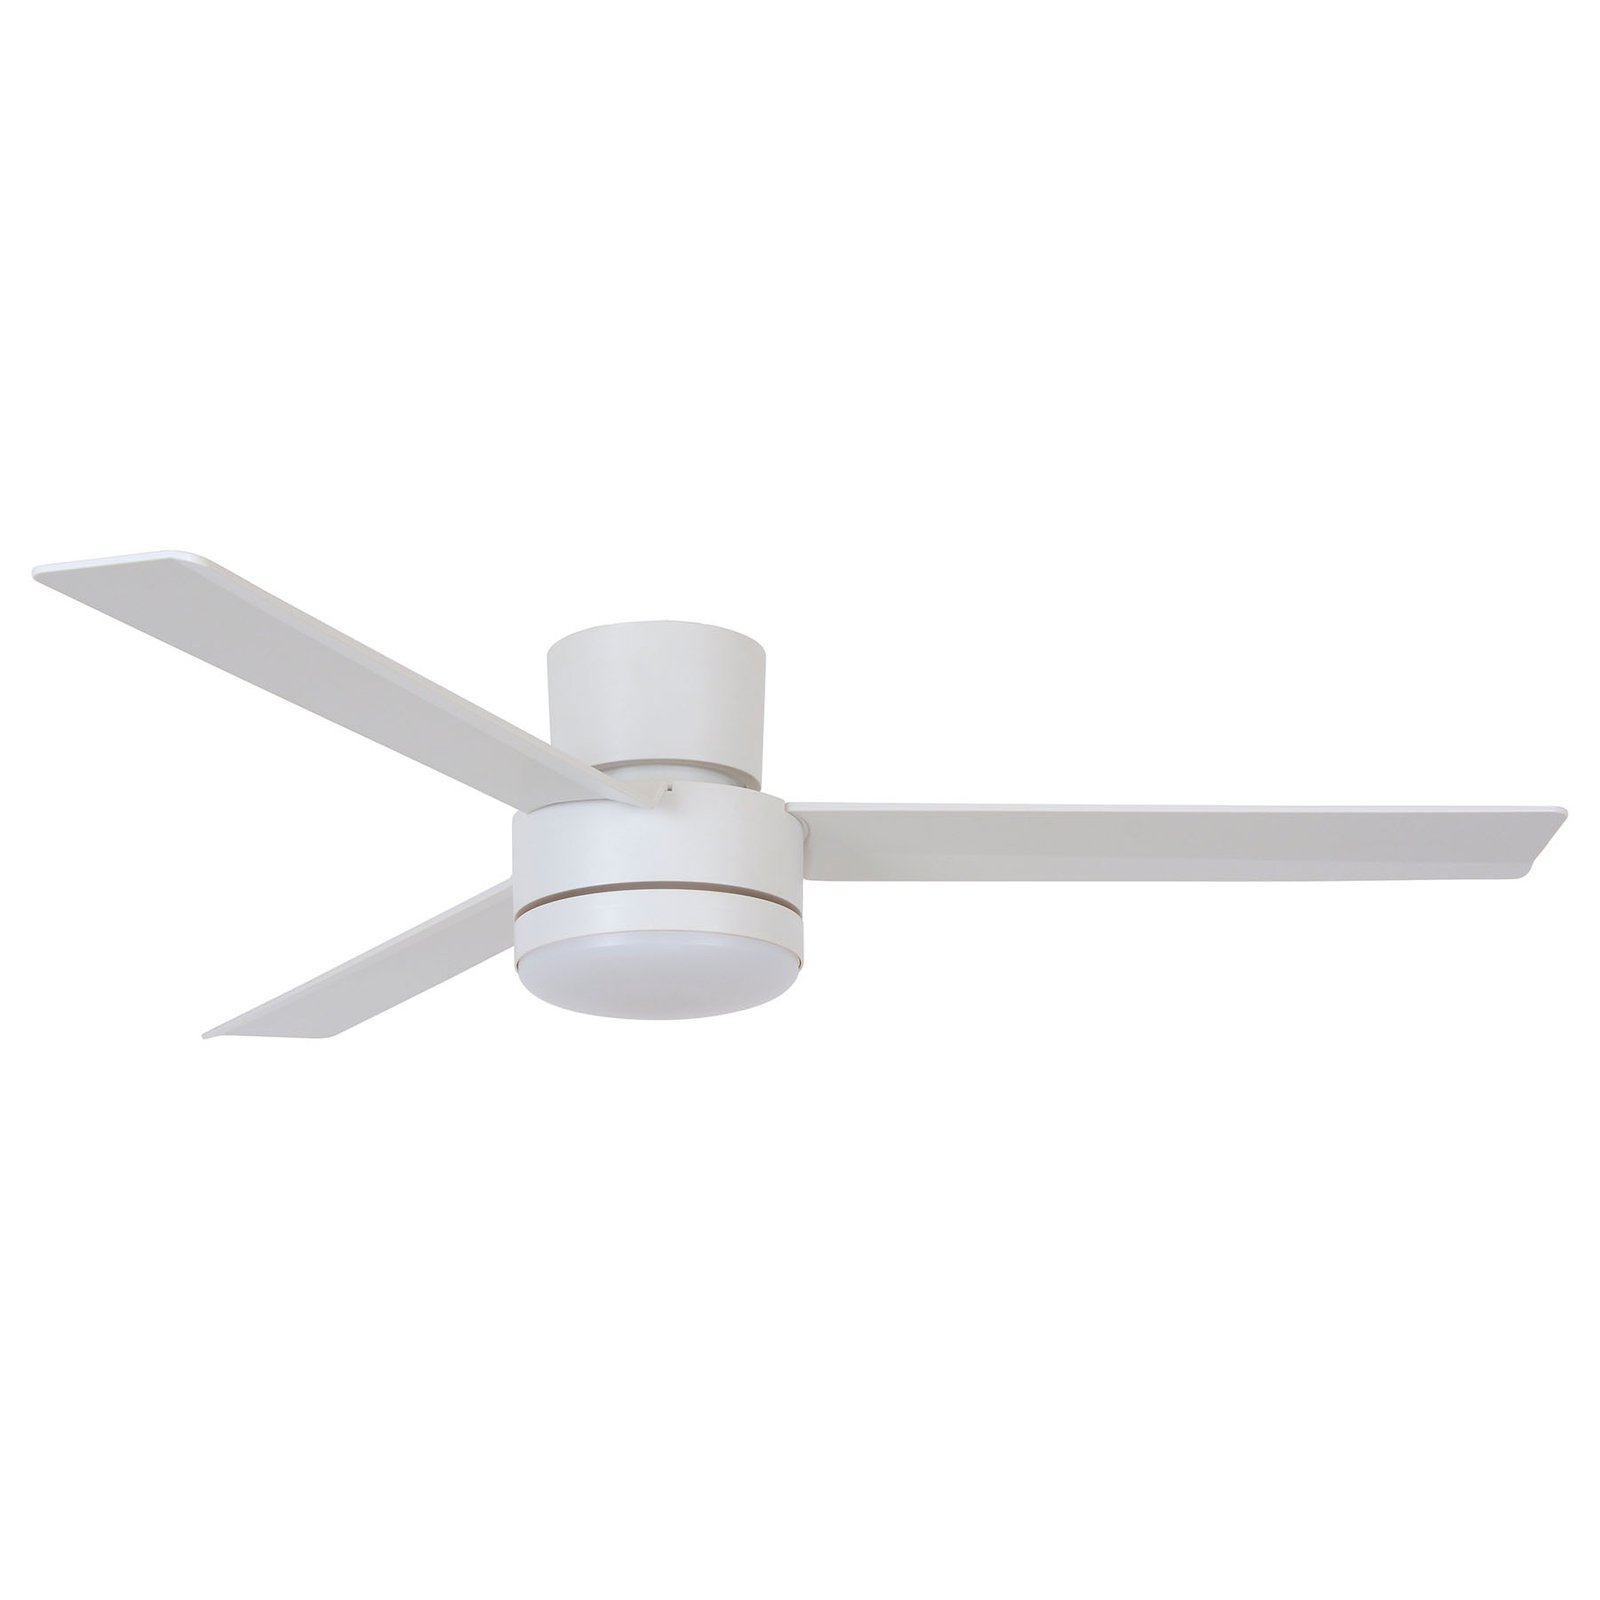 Bayside Lagoon CTC fan with light, white